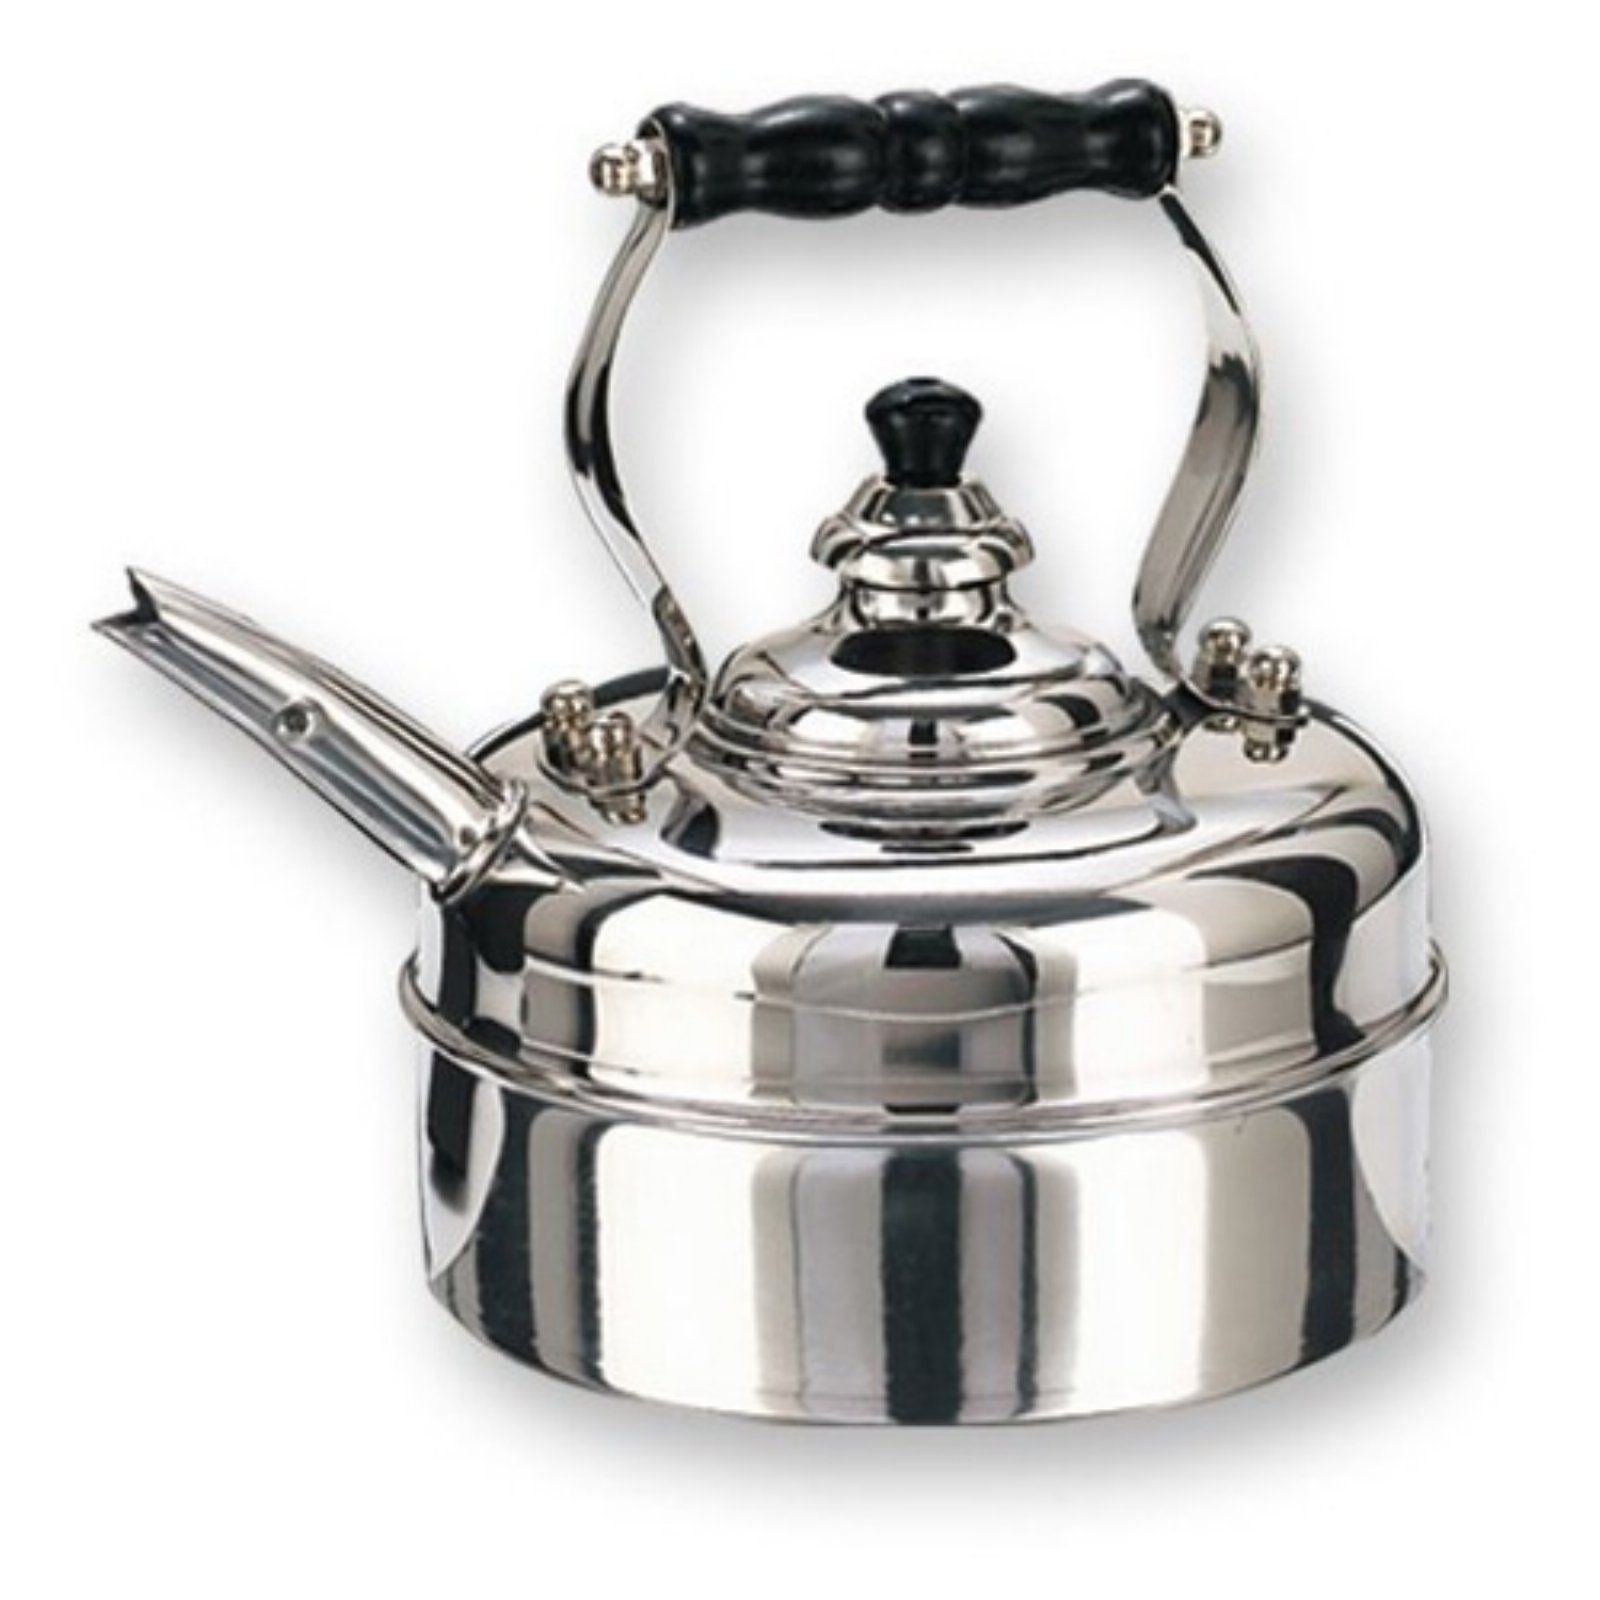 Whistling tea kettle has both this handsome tea kettle is